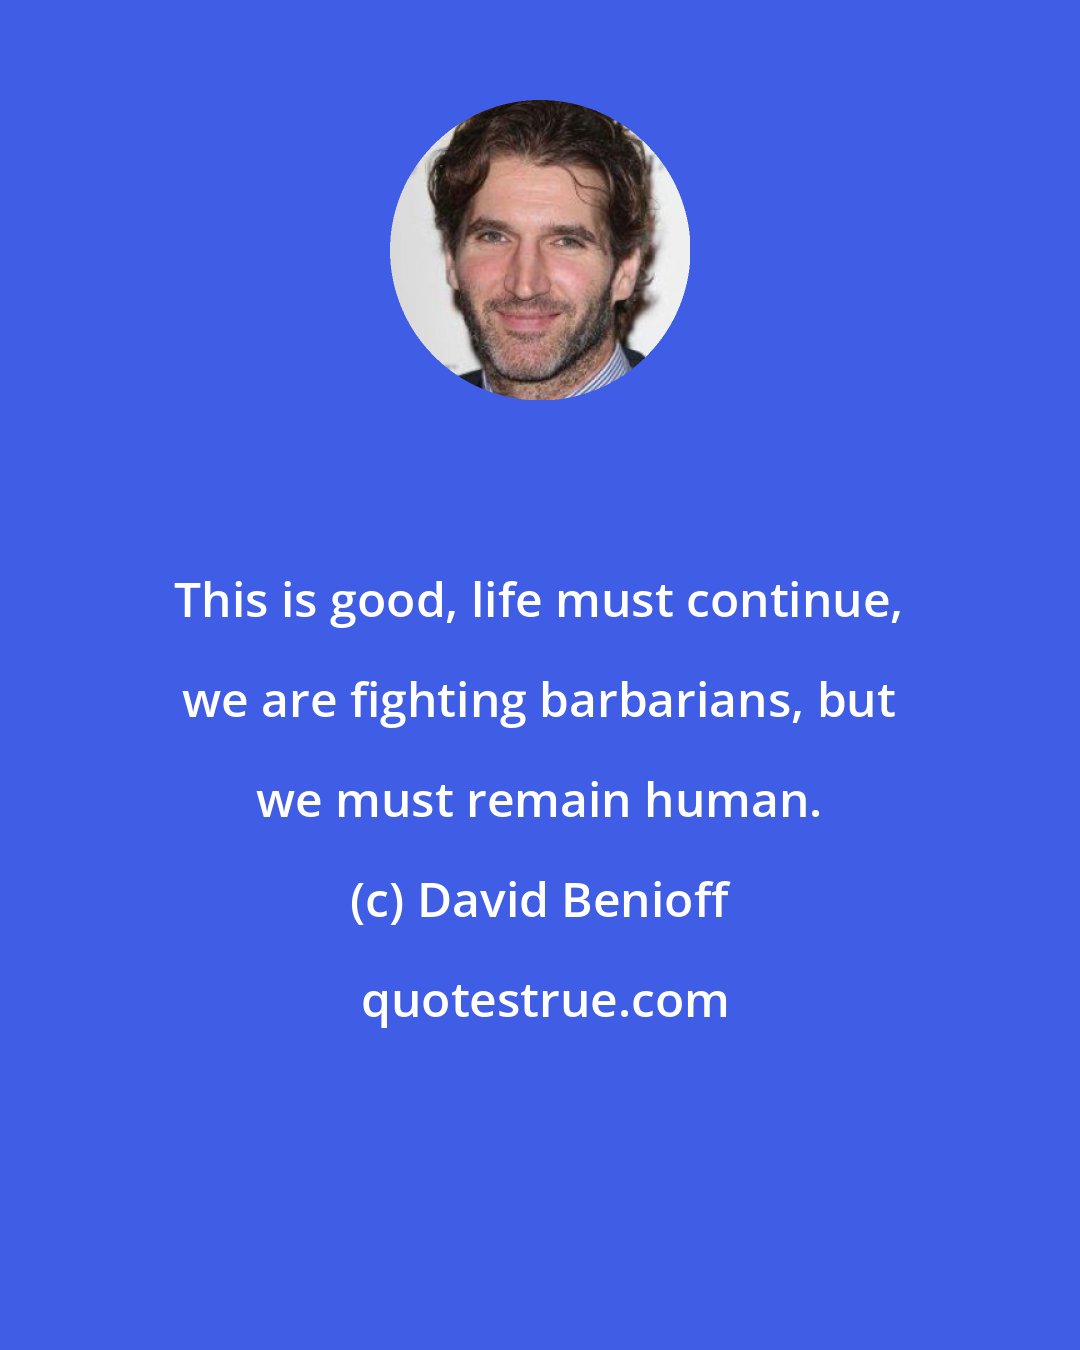 David Benioff: This is good, life must continue, we are fighting barbarians, but we must remain human.